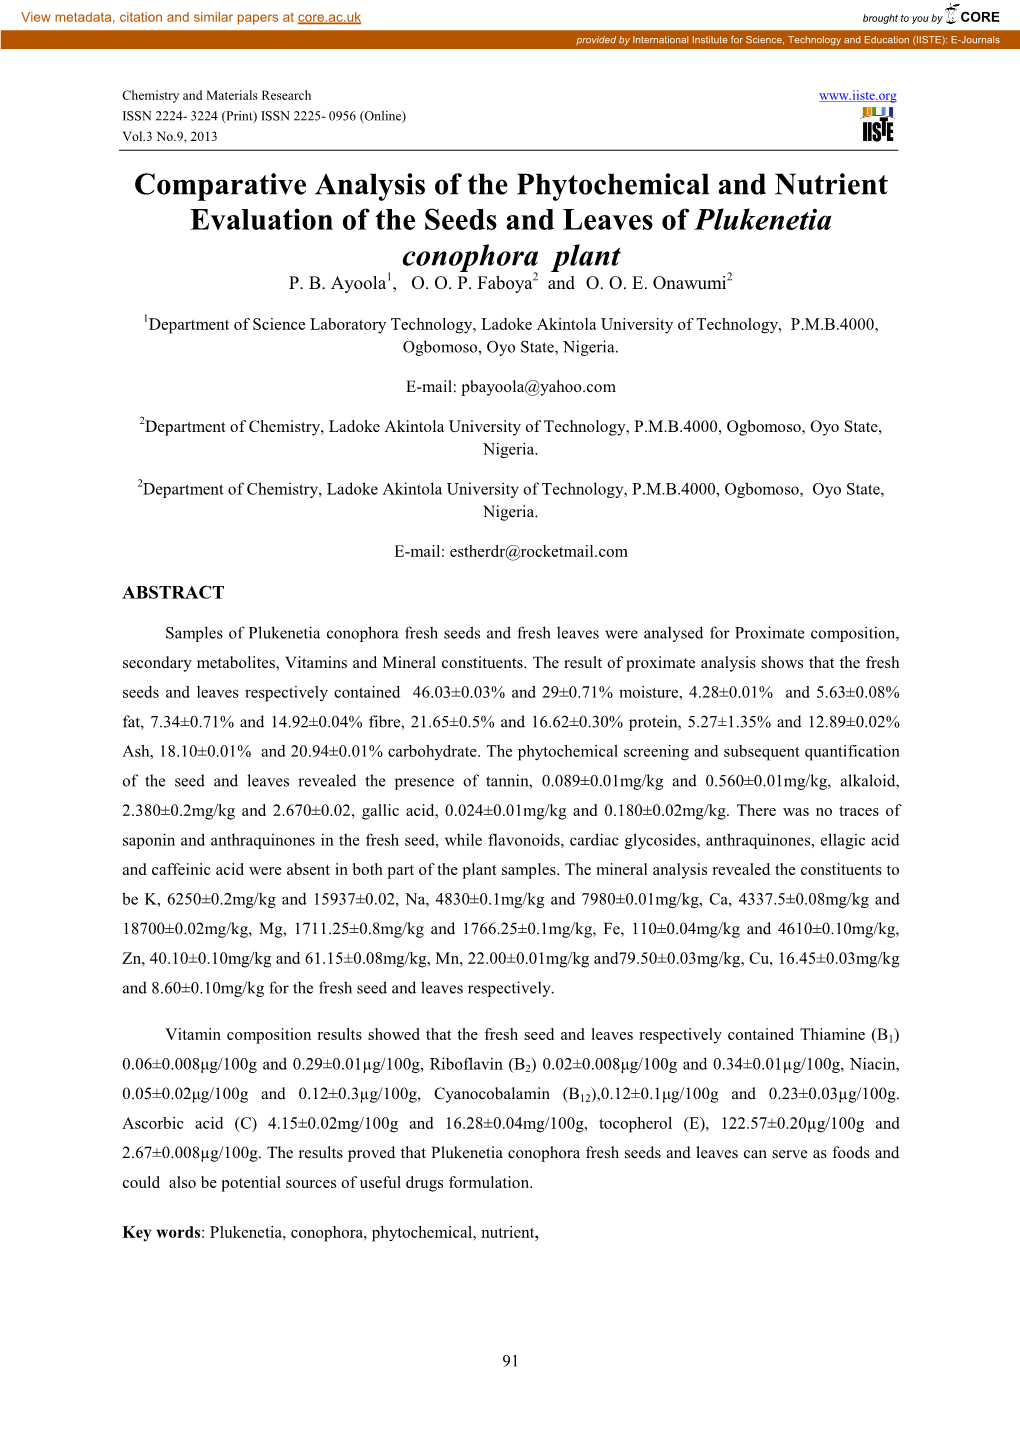 Comparative Analysis of the Phytochemical and Nutrient Evaluation of the Seeds and Leaves of Plukenetia Conophora Plant P